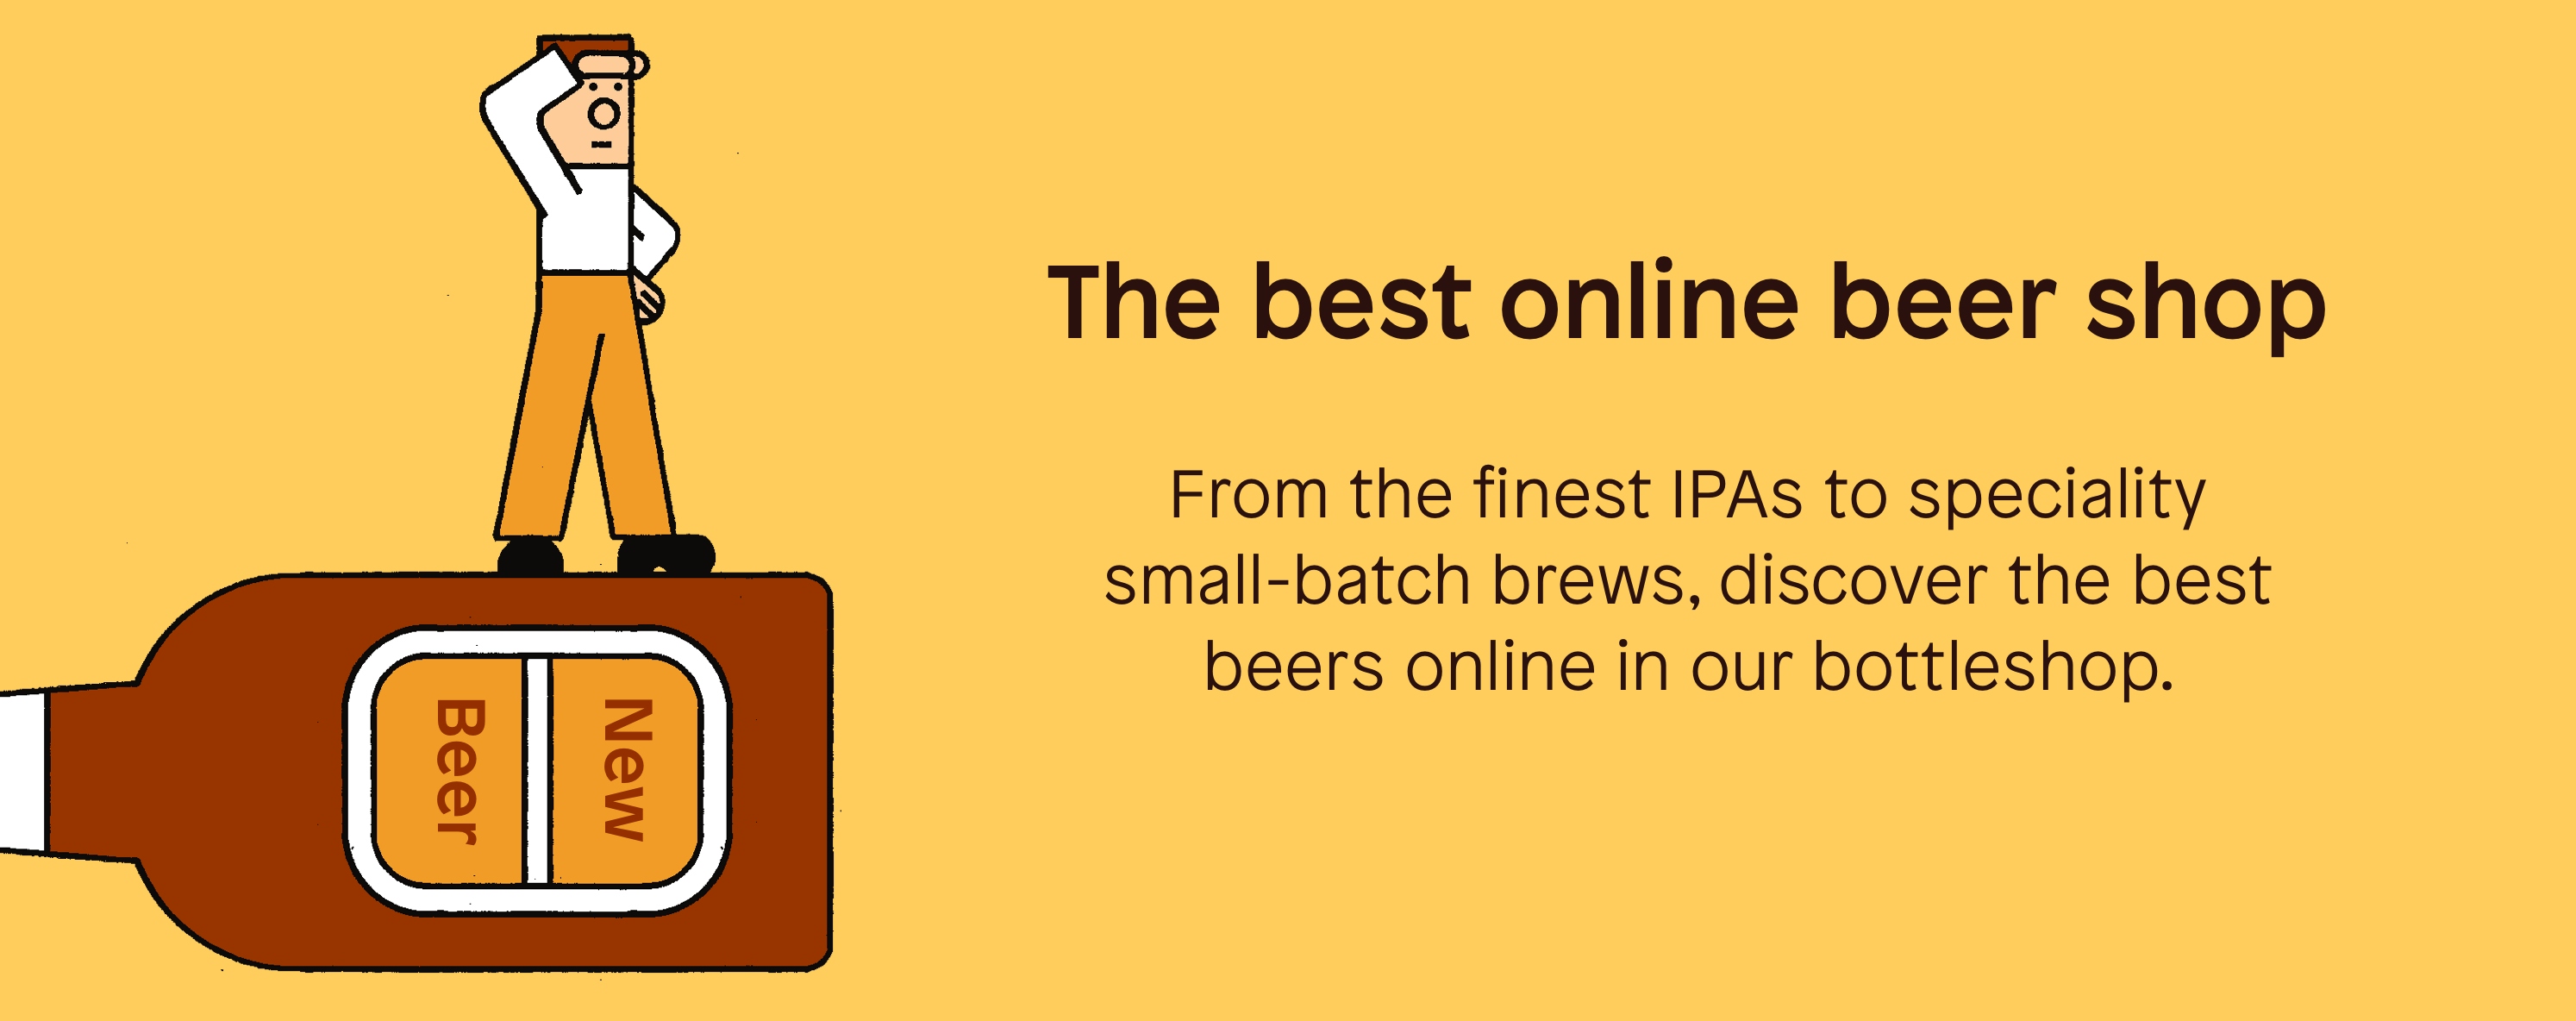 An illustration of a man stands on a bottle of beer, which is on its side. Beside the illustration there is the text “The best online beer shop” Underneath “From the finest IPAs to speciality small-batch brews, discover the best beers online in our bottleshop.”